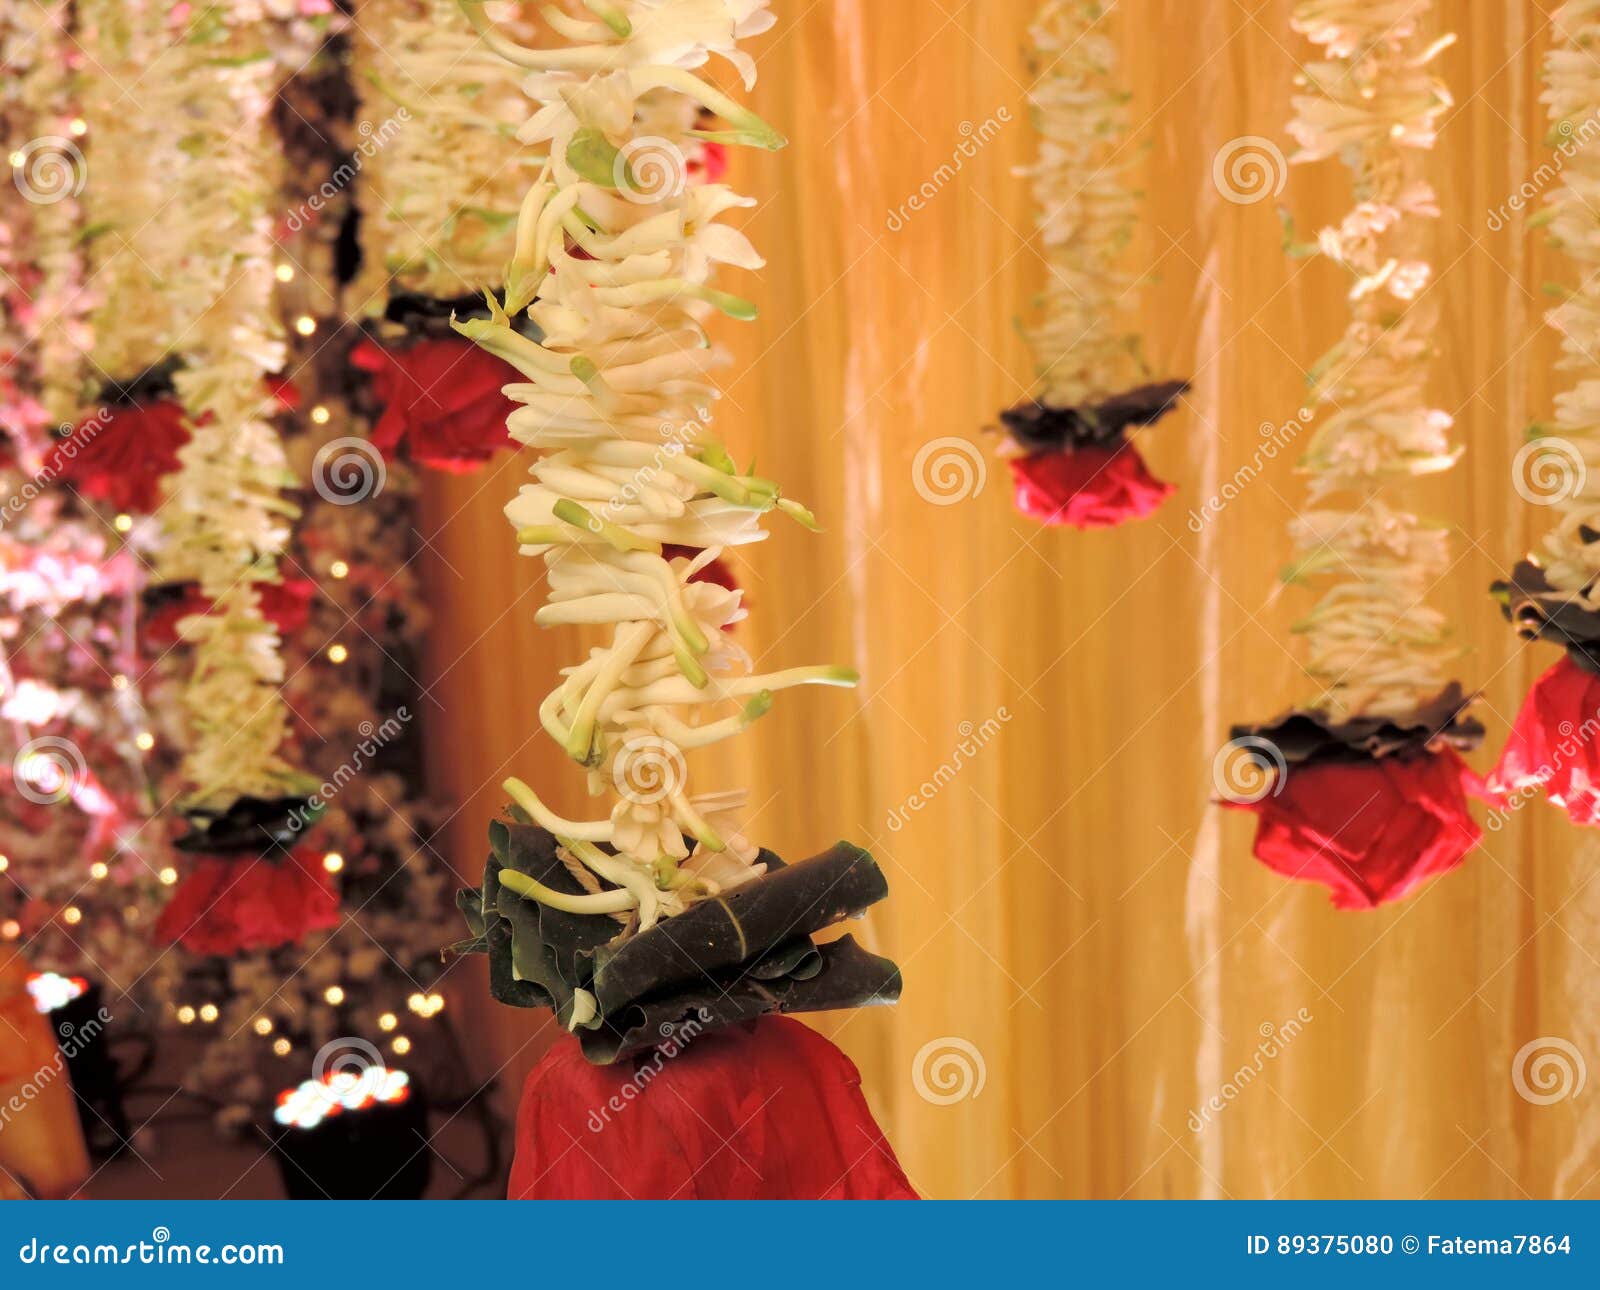 Flowers Used for Decorating Entrance for Hindu Wedding, India ...